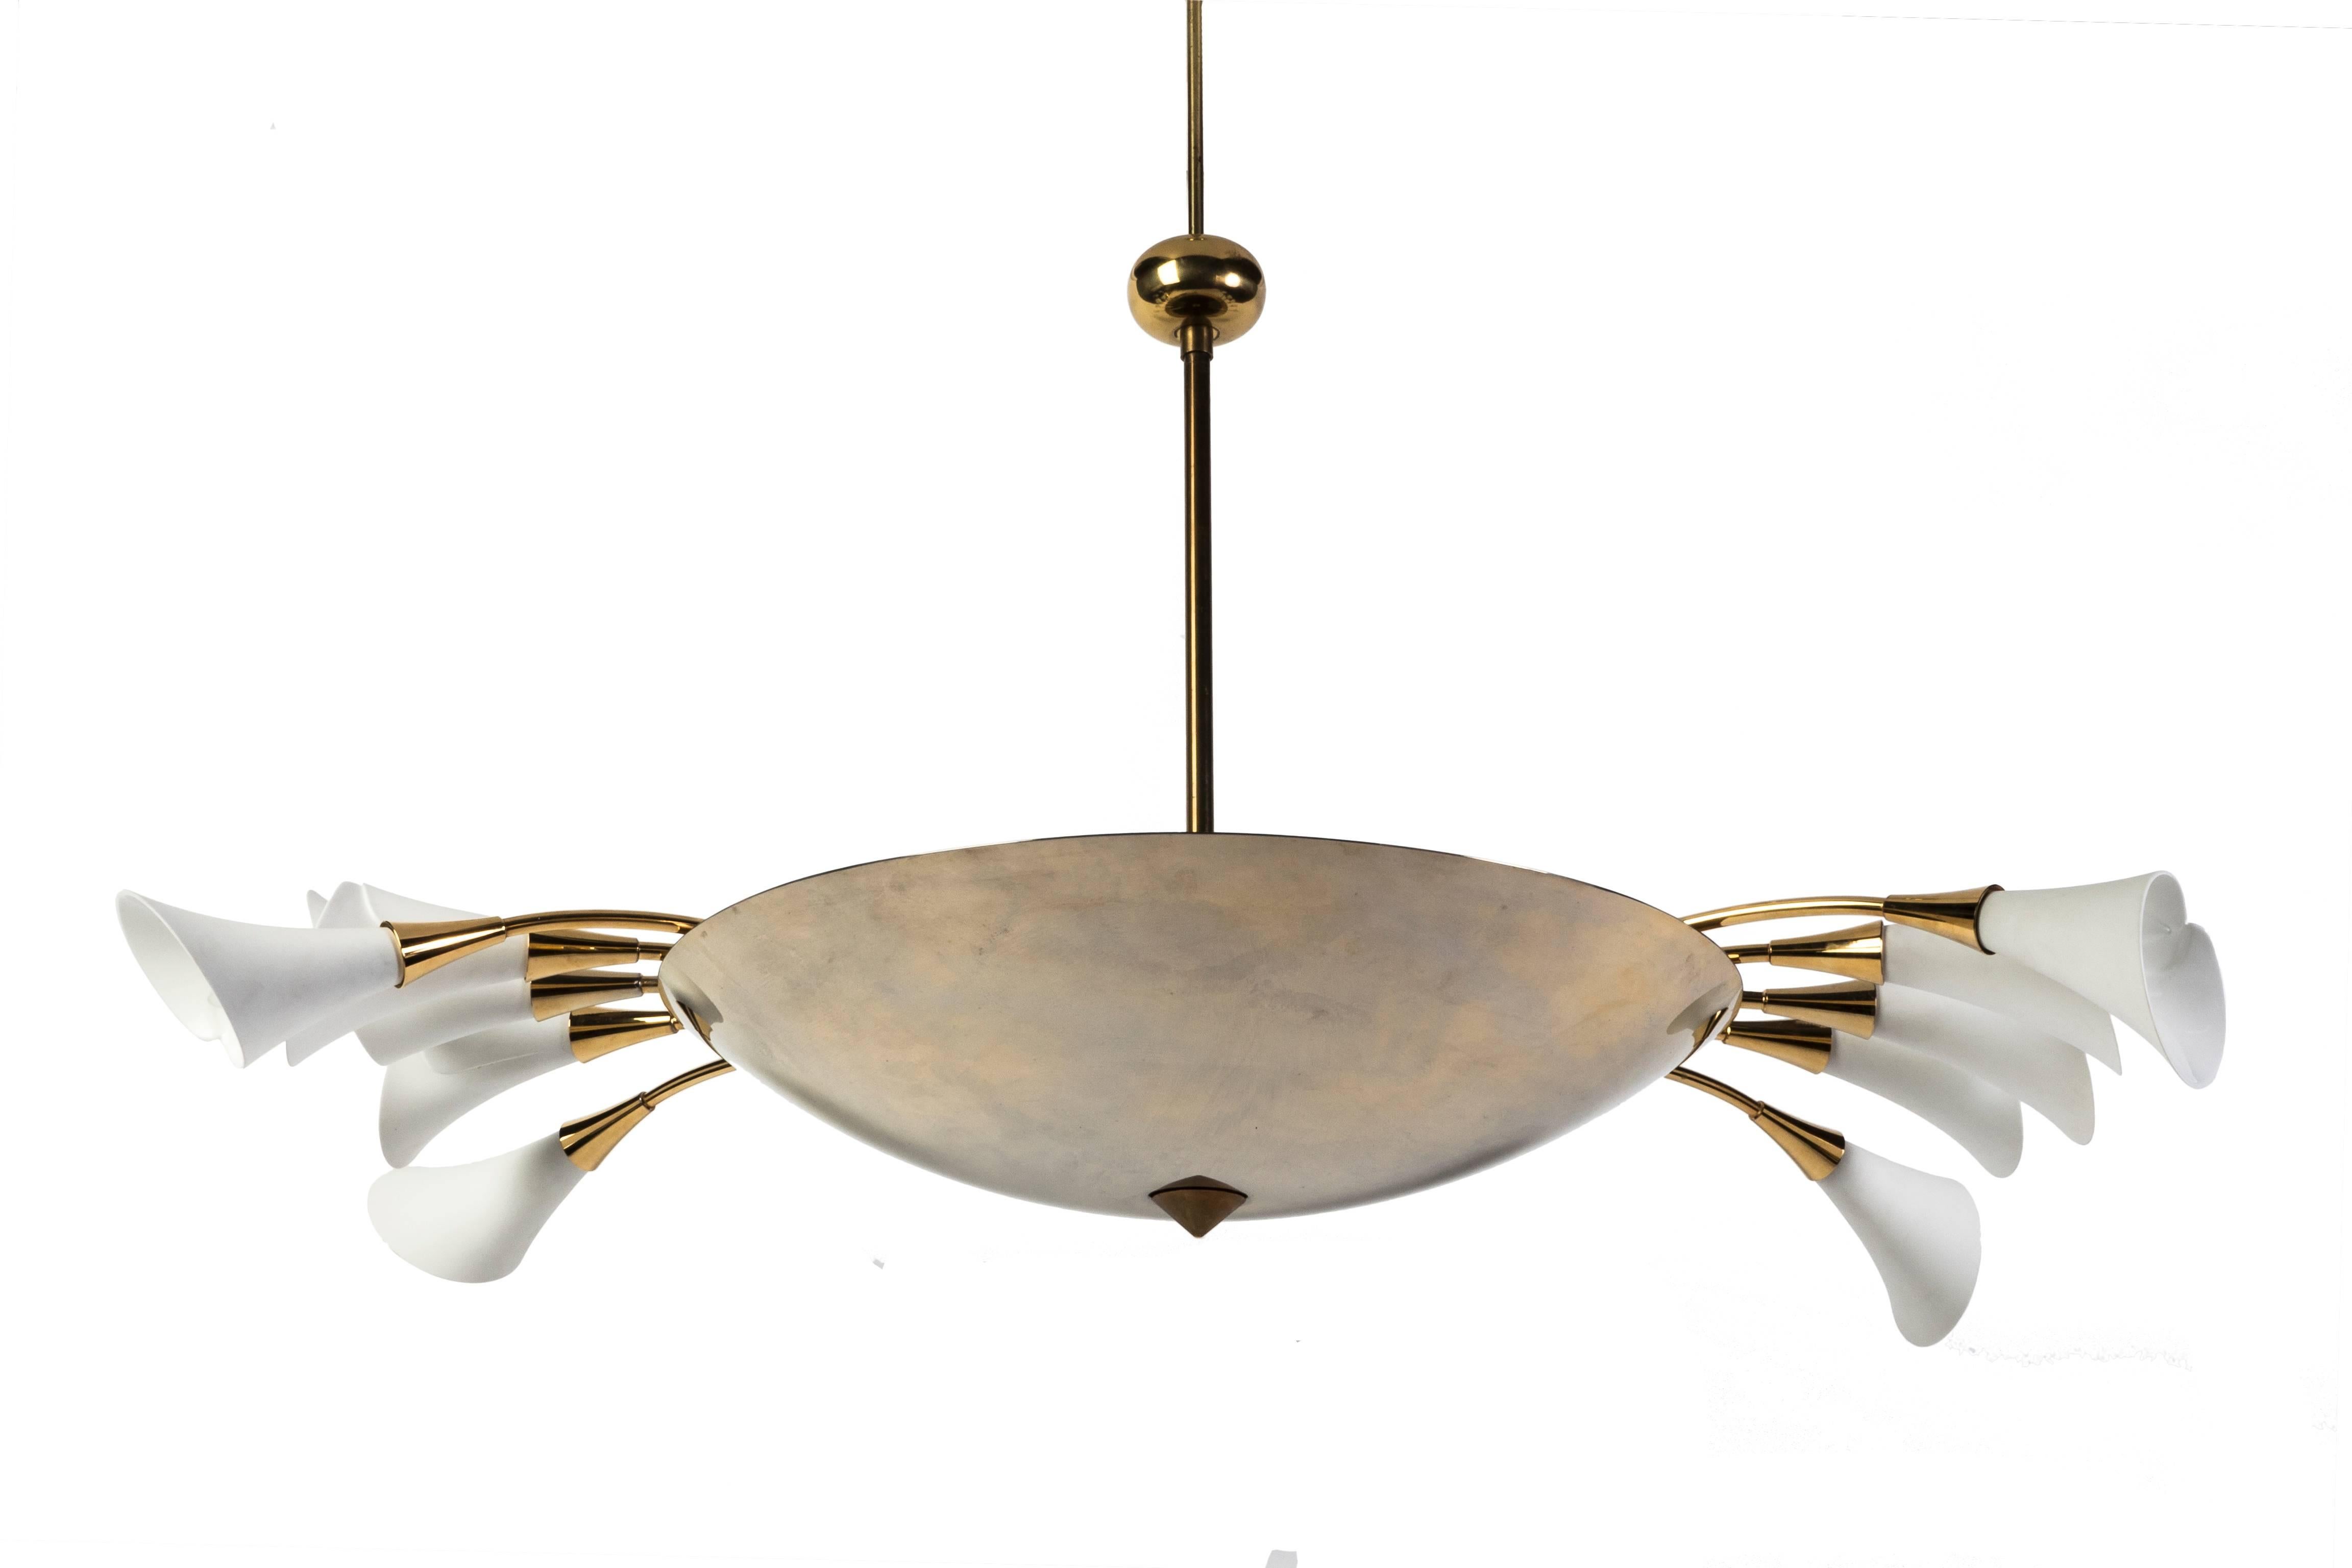 This stunning polished brass Italian chandelier features a reflective brass center bowl from which extends ten-arms with porcelain shades fashioned after calla lilies. This piece was made in the 1950s. Only two of these chandeliers exist worldwide.